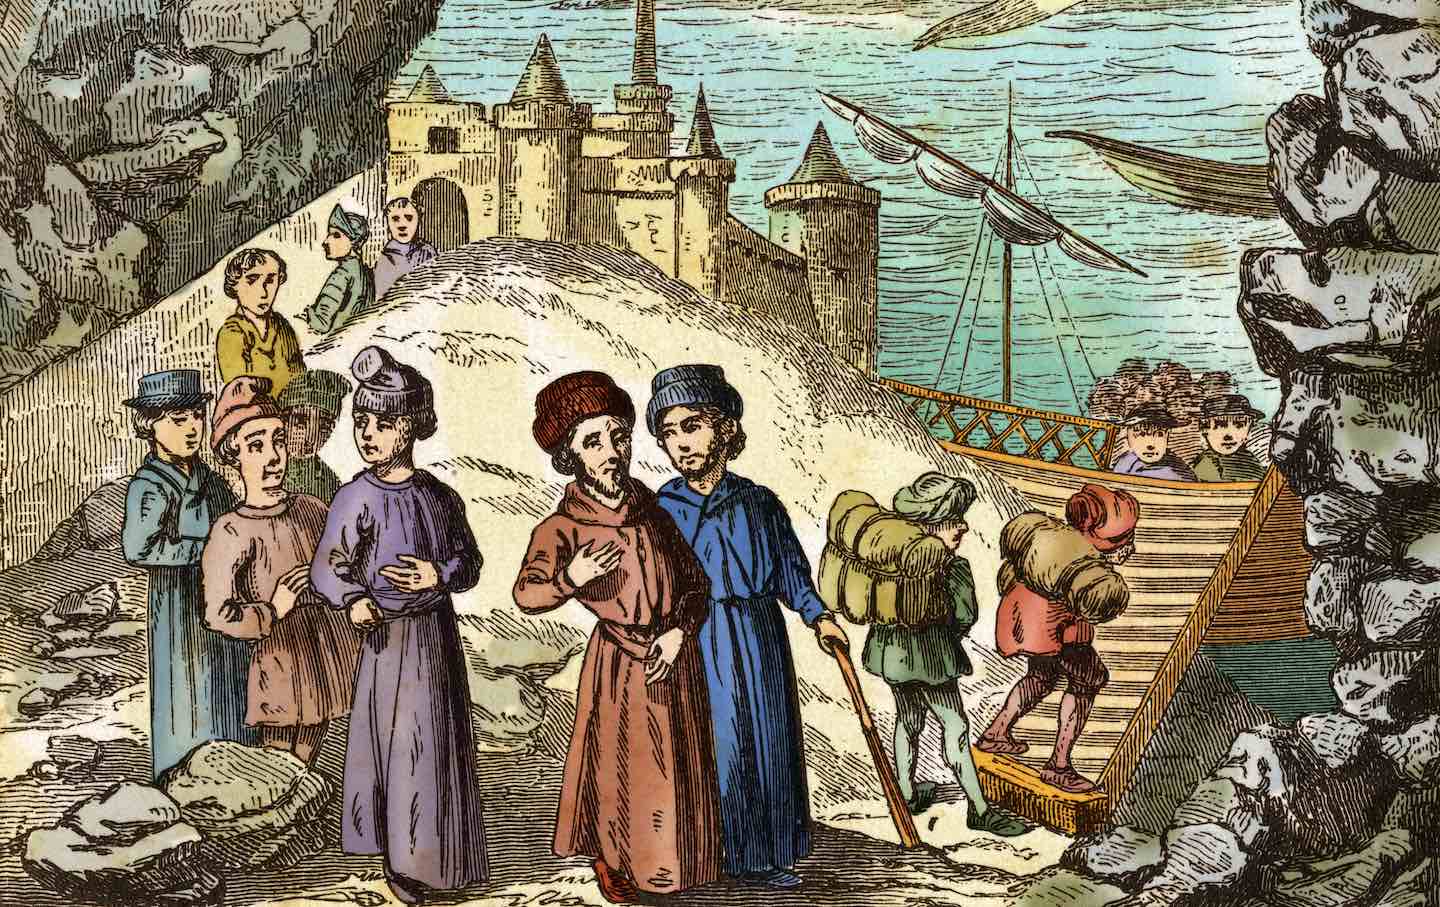 An illustration of the 1492 expulsion of the Jewish communities from the Spanish kingdoms.